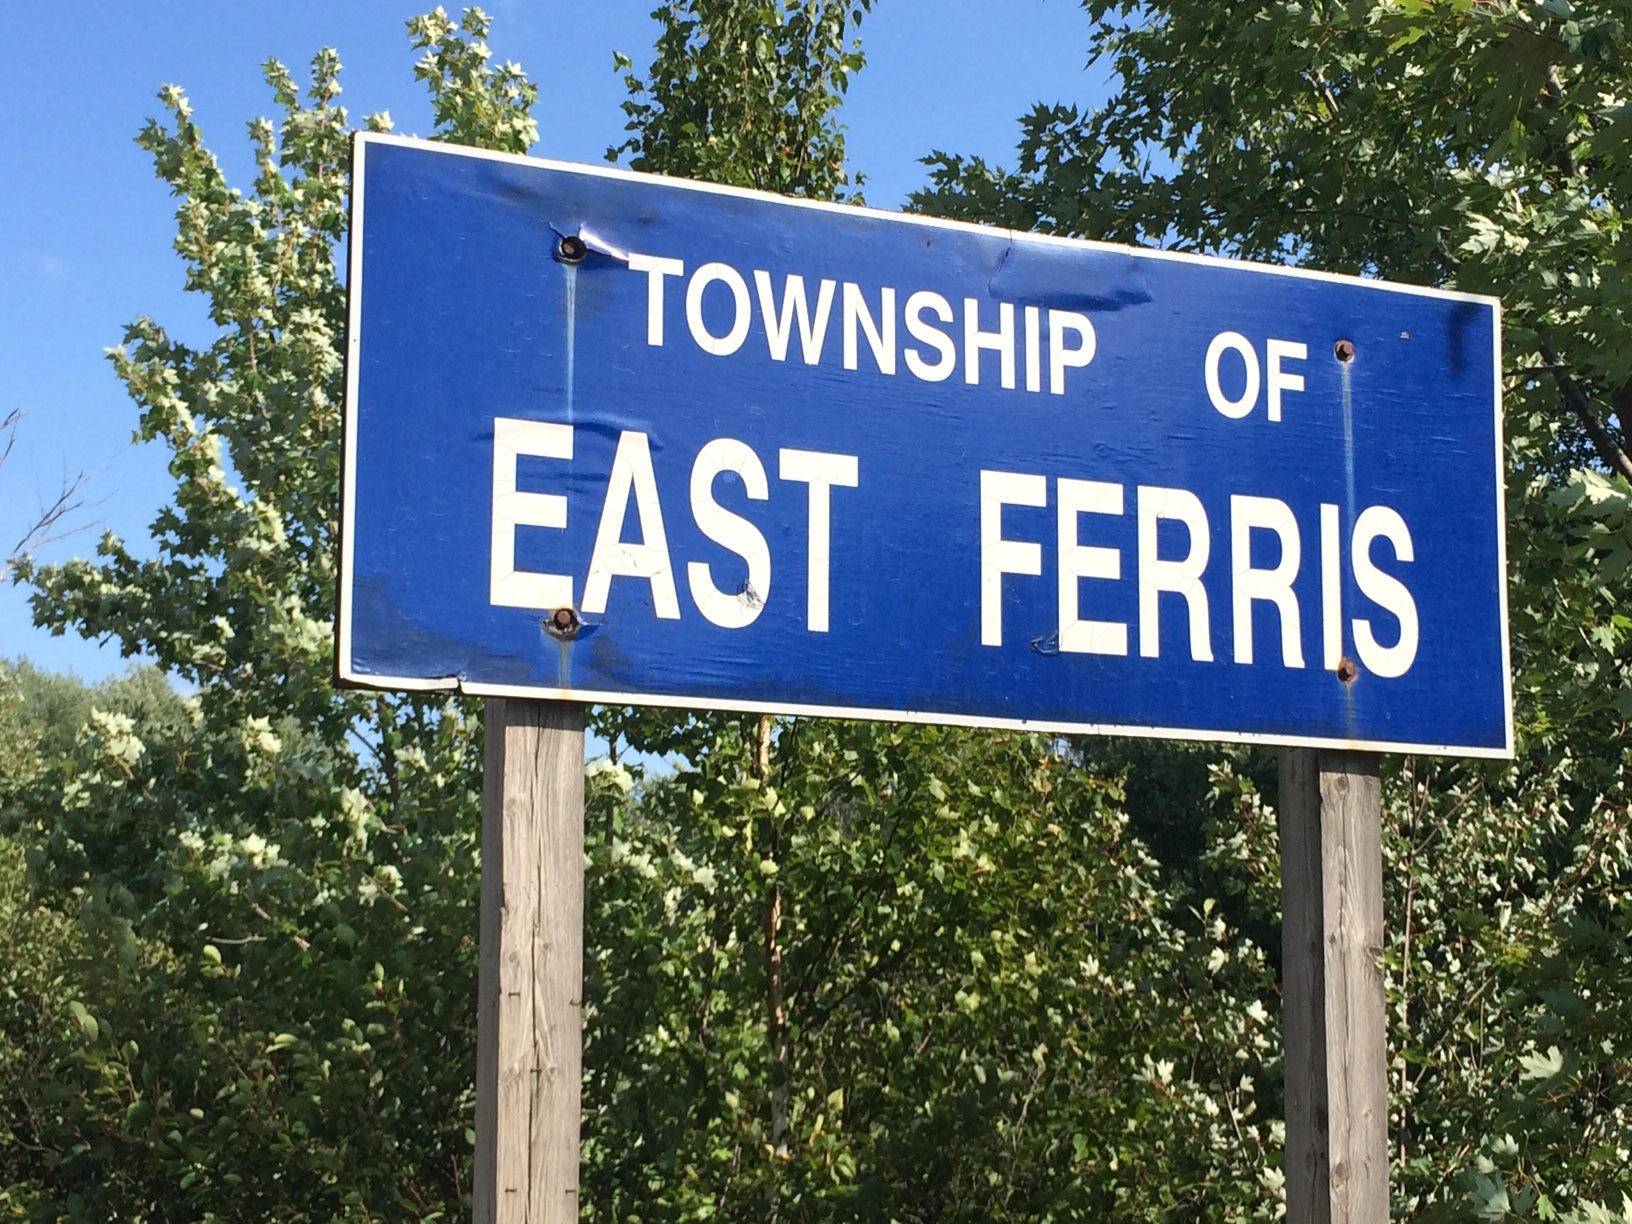 A celebration 100 years in the making this weekend in East Ferris.